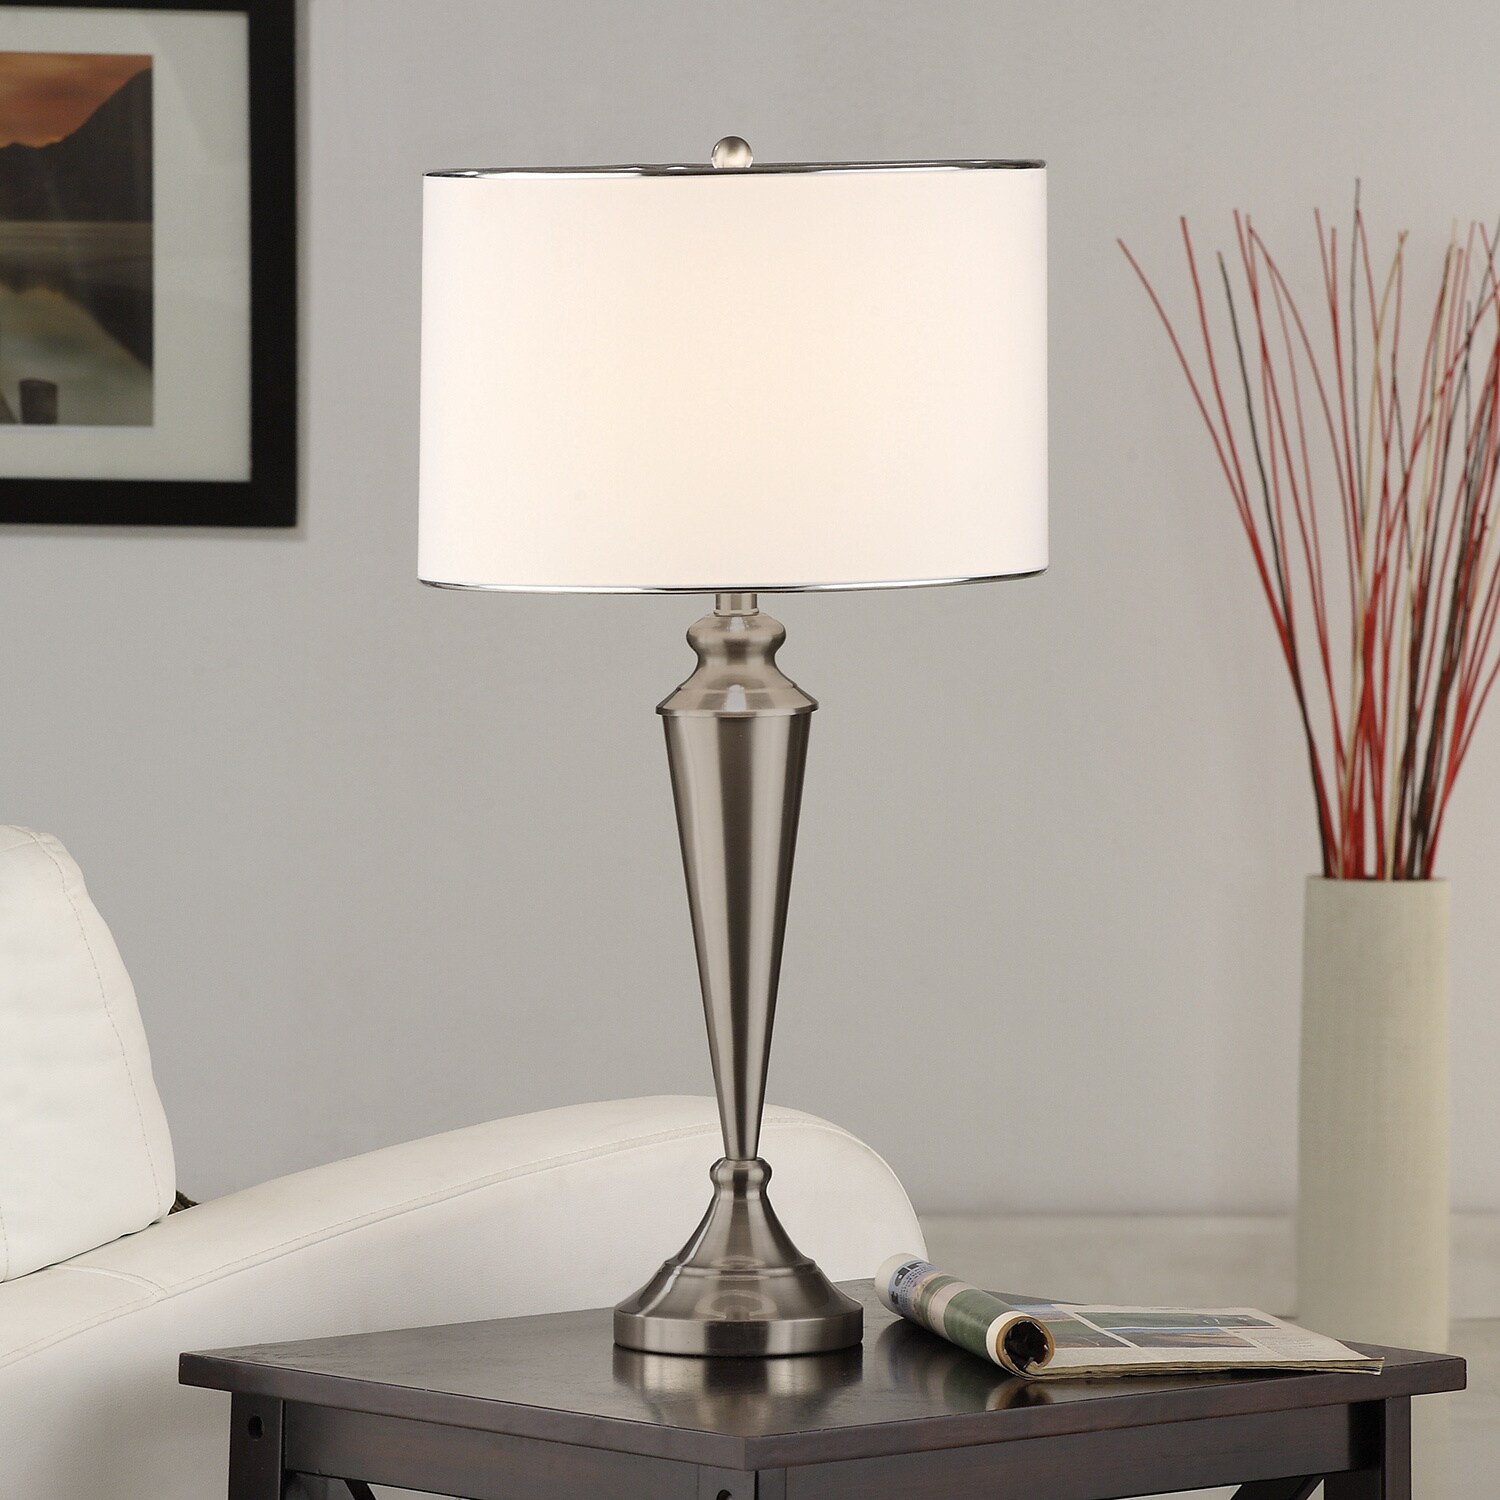 Shop Brushed Nickel Contemporary Table Lamp (Set of 2) - Free Shipping